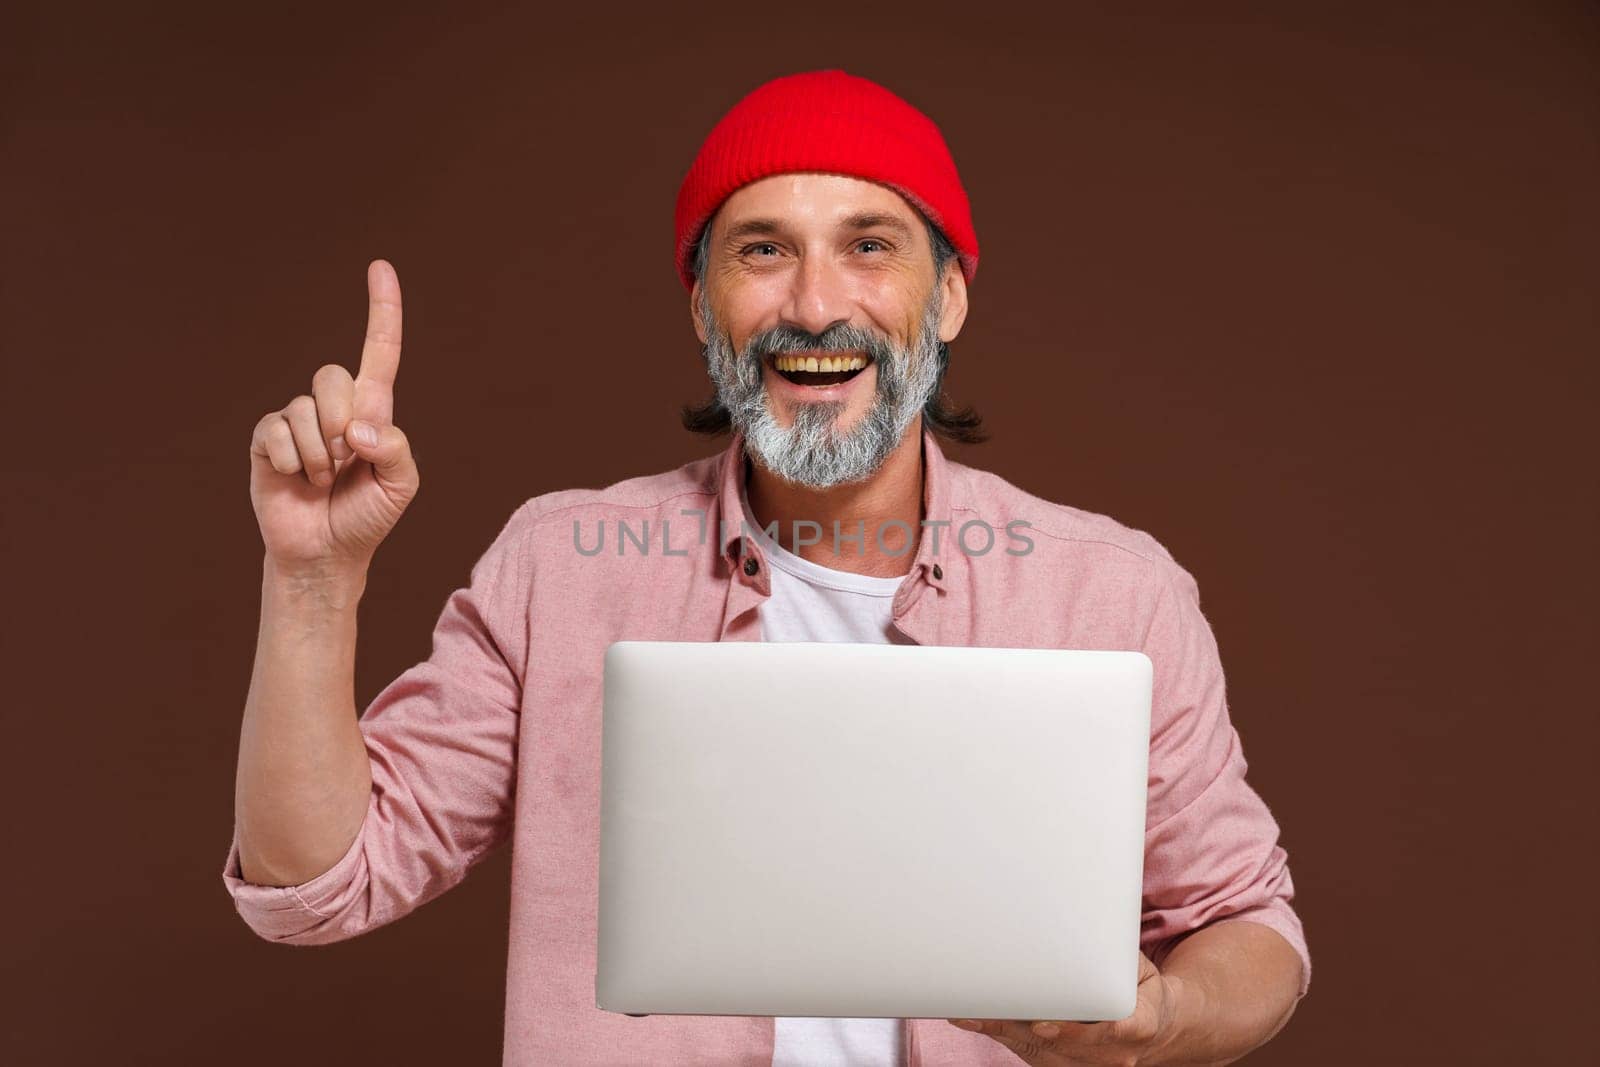 Available information on the concept network. Eureka. Quick search for solution. man holds laptop and pointing up with finger of other hand, symbolizing eureka moment of finding quick solution through online networks and digital technology. High quality photo